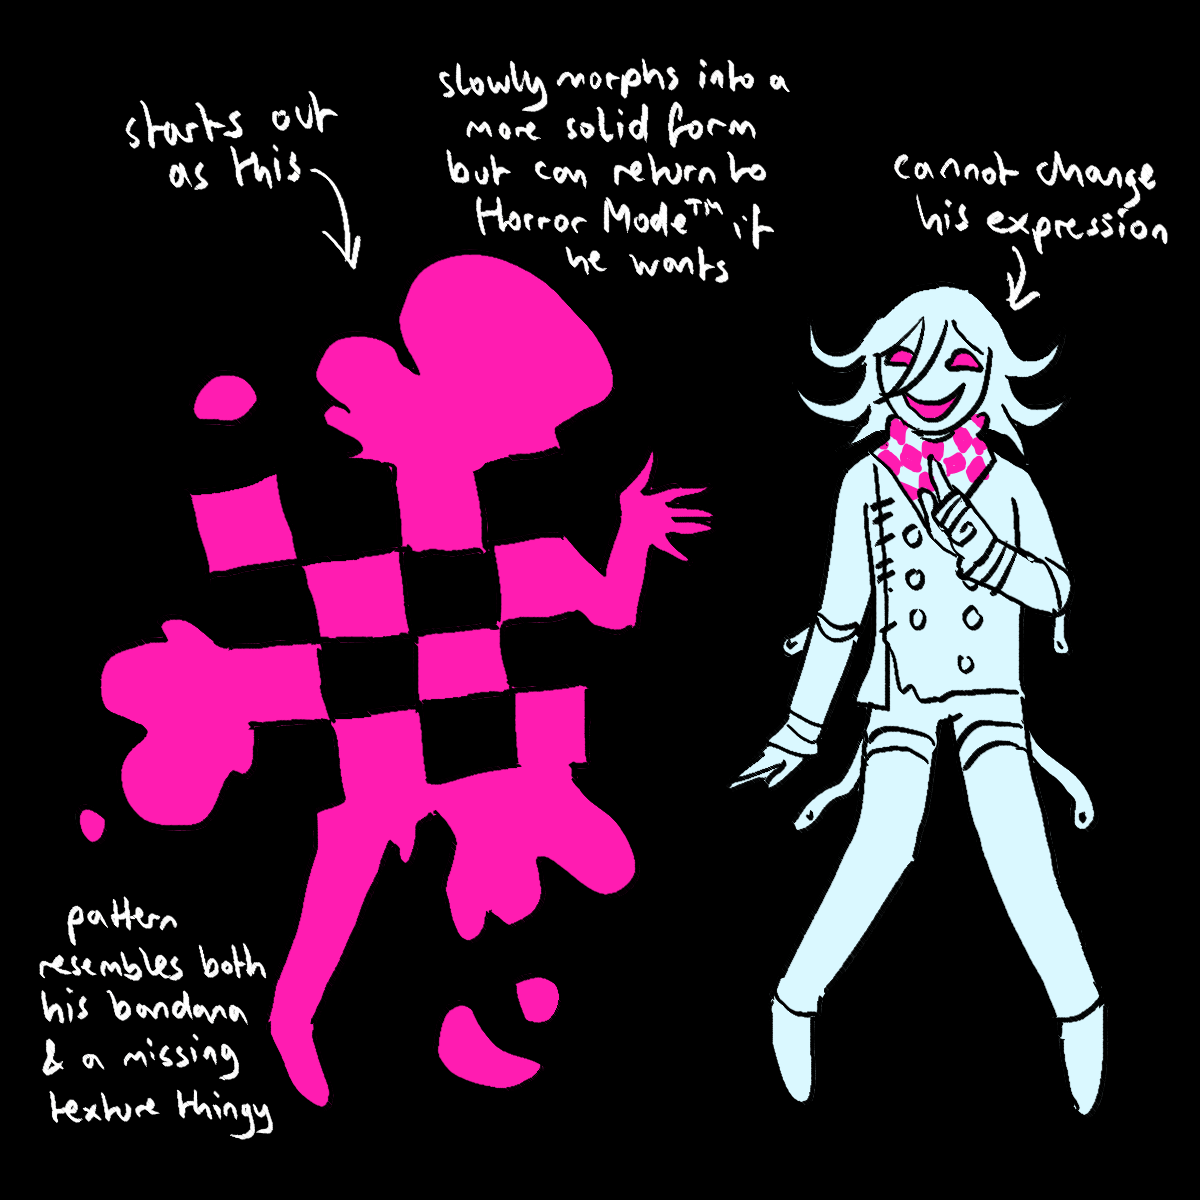 a drawing of kokichi as a ghost, once in his normal form and once as a splattered
		mess with a magenta-and-black checker pattern in the middle. text next to it says 'starts out as this' and 'slowly
		morphs into a more solid form but can return to Horror Mode TM if he wants' and 'pattern resembles both his bandana
		and a missing texture thingy'. an arrow pointing at his normal form says 'cannot change his expression'. his normal
		form bears a mask-like grin.